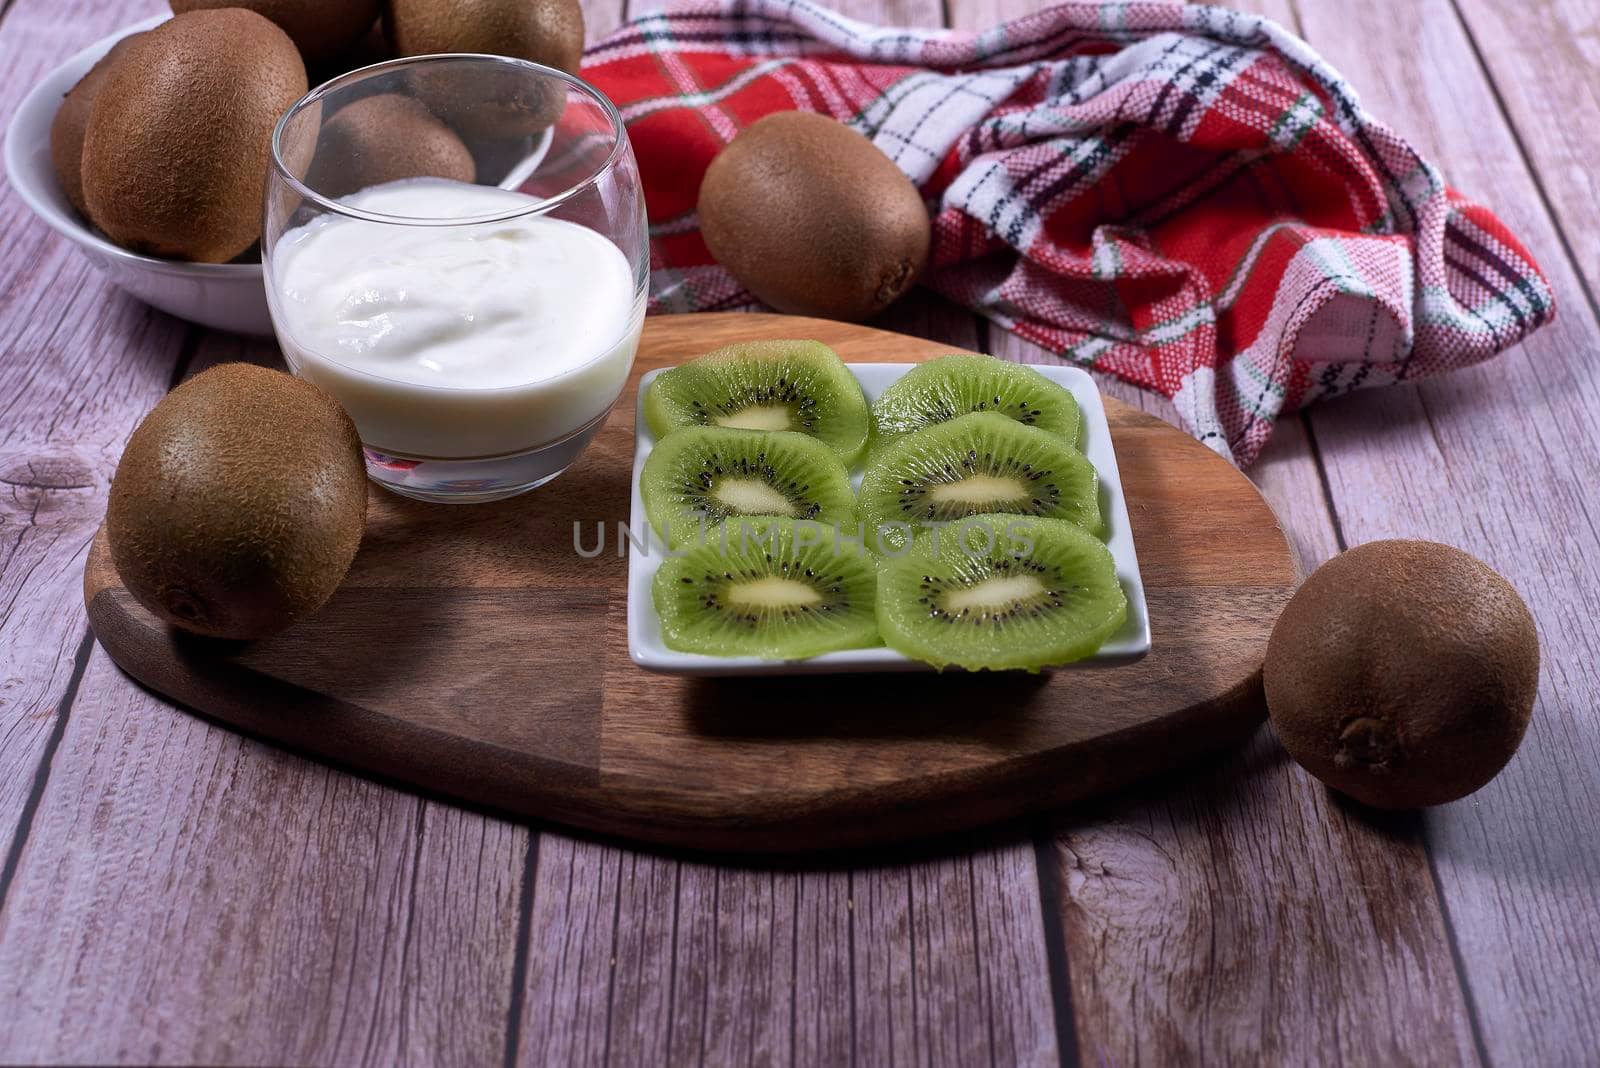 Yoghurt glass and plate of cut kiwis and several whole ones on wood. Wooden board, red and white kitchen towel, squares, white bowl, front view.